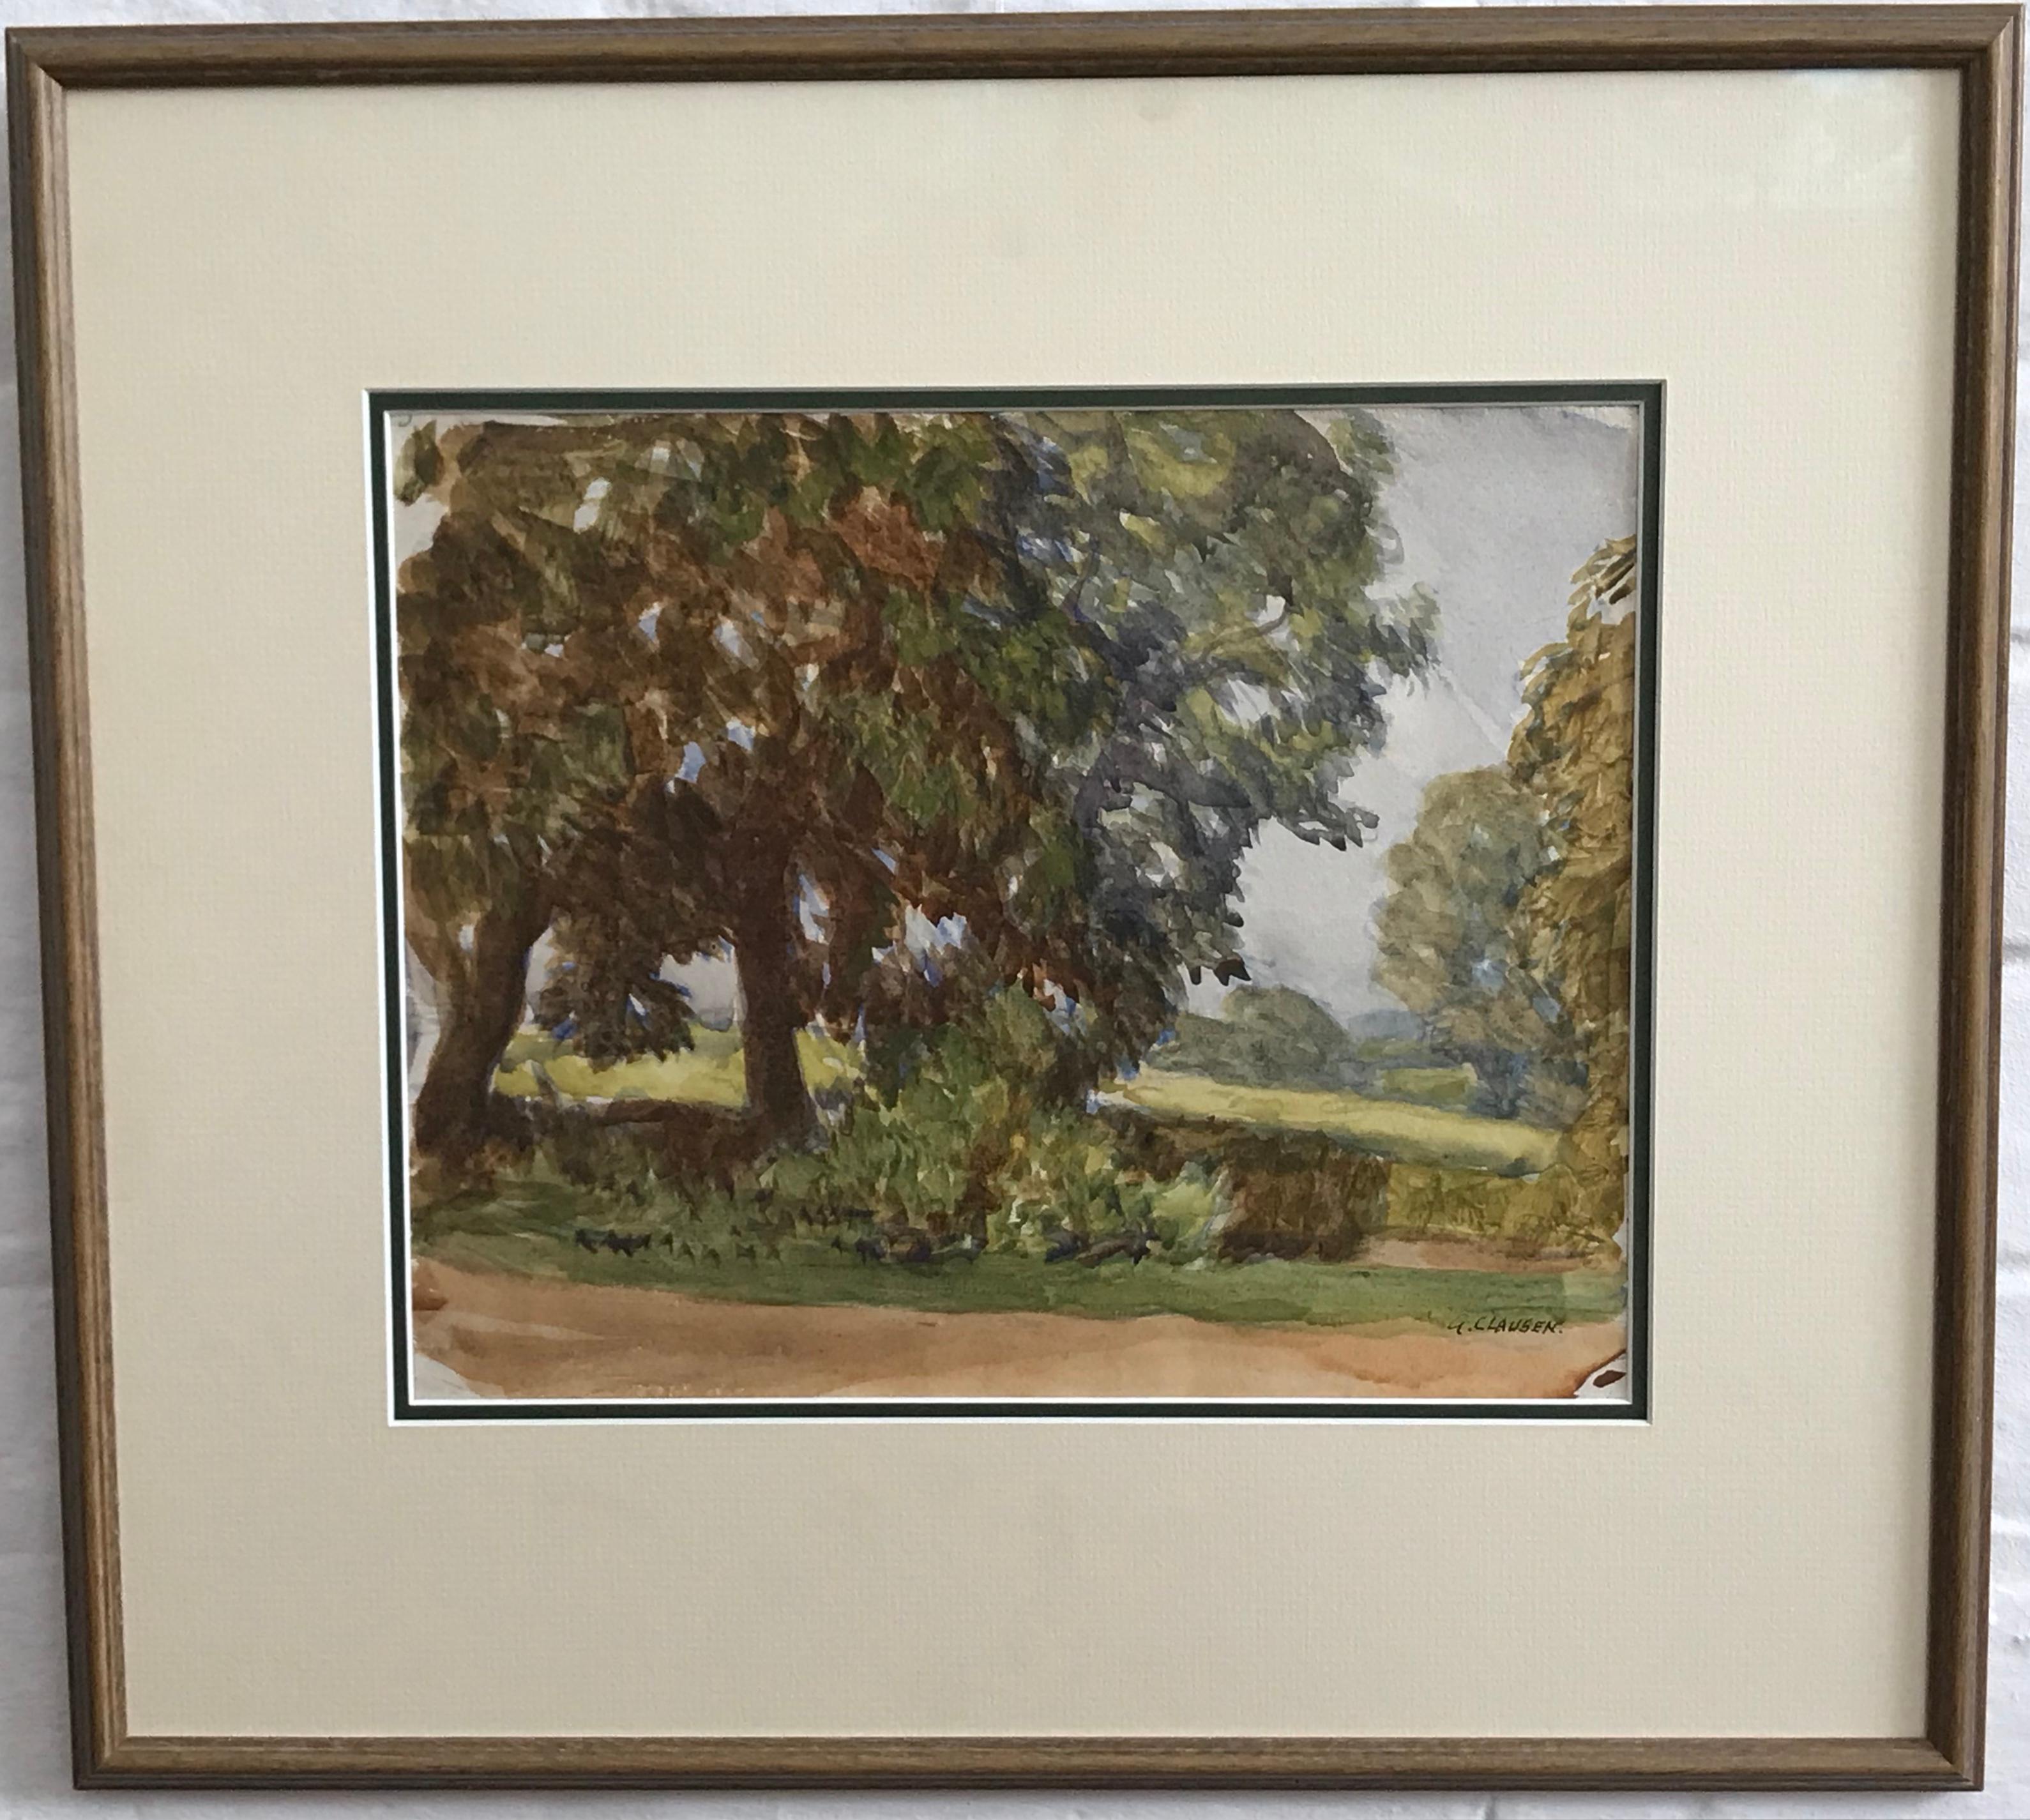 Sir George Clausen (1852-1944)
Sunlight through the trees,
Signed,
Watercolour,
10 x 12 inches

A beautiful study of the play of light through the trees in very good condition.

George Clausen was the son of a decorative artist of Danish descent.